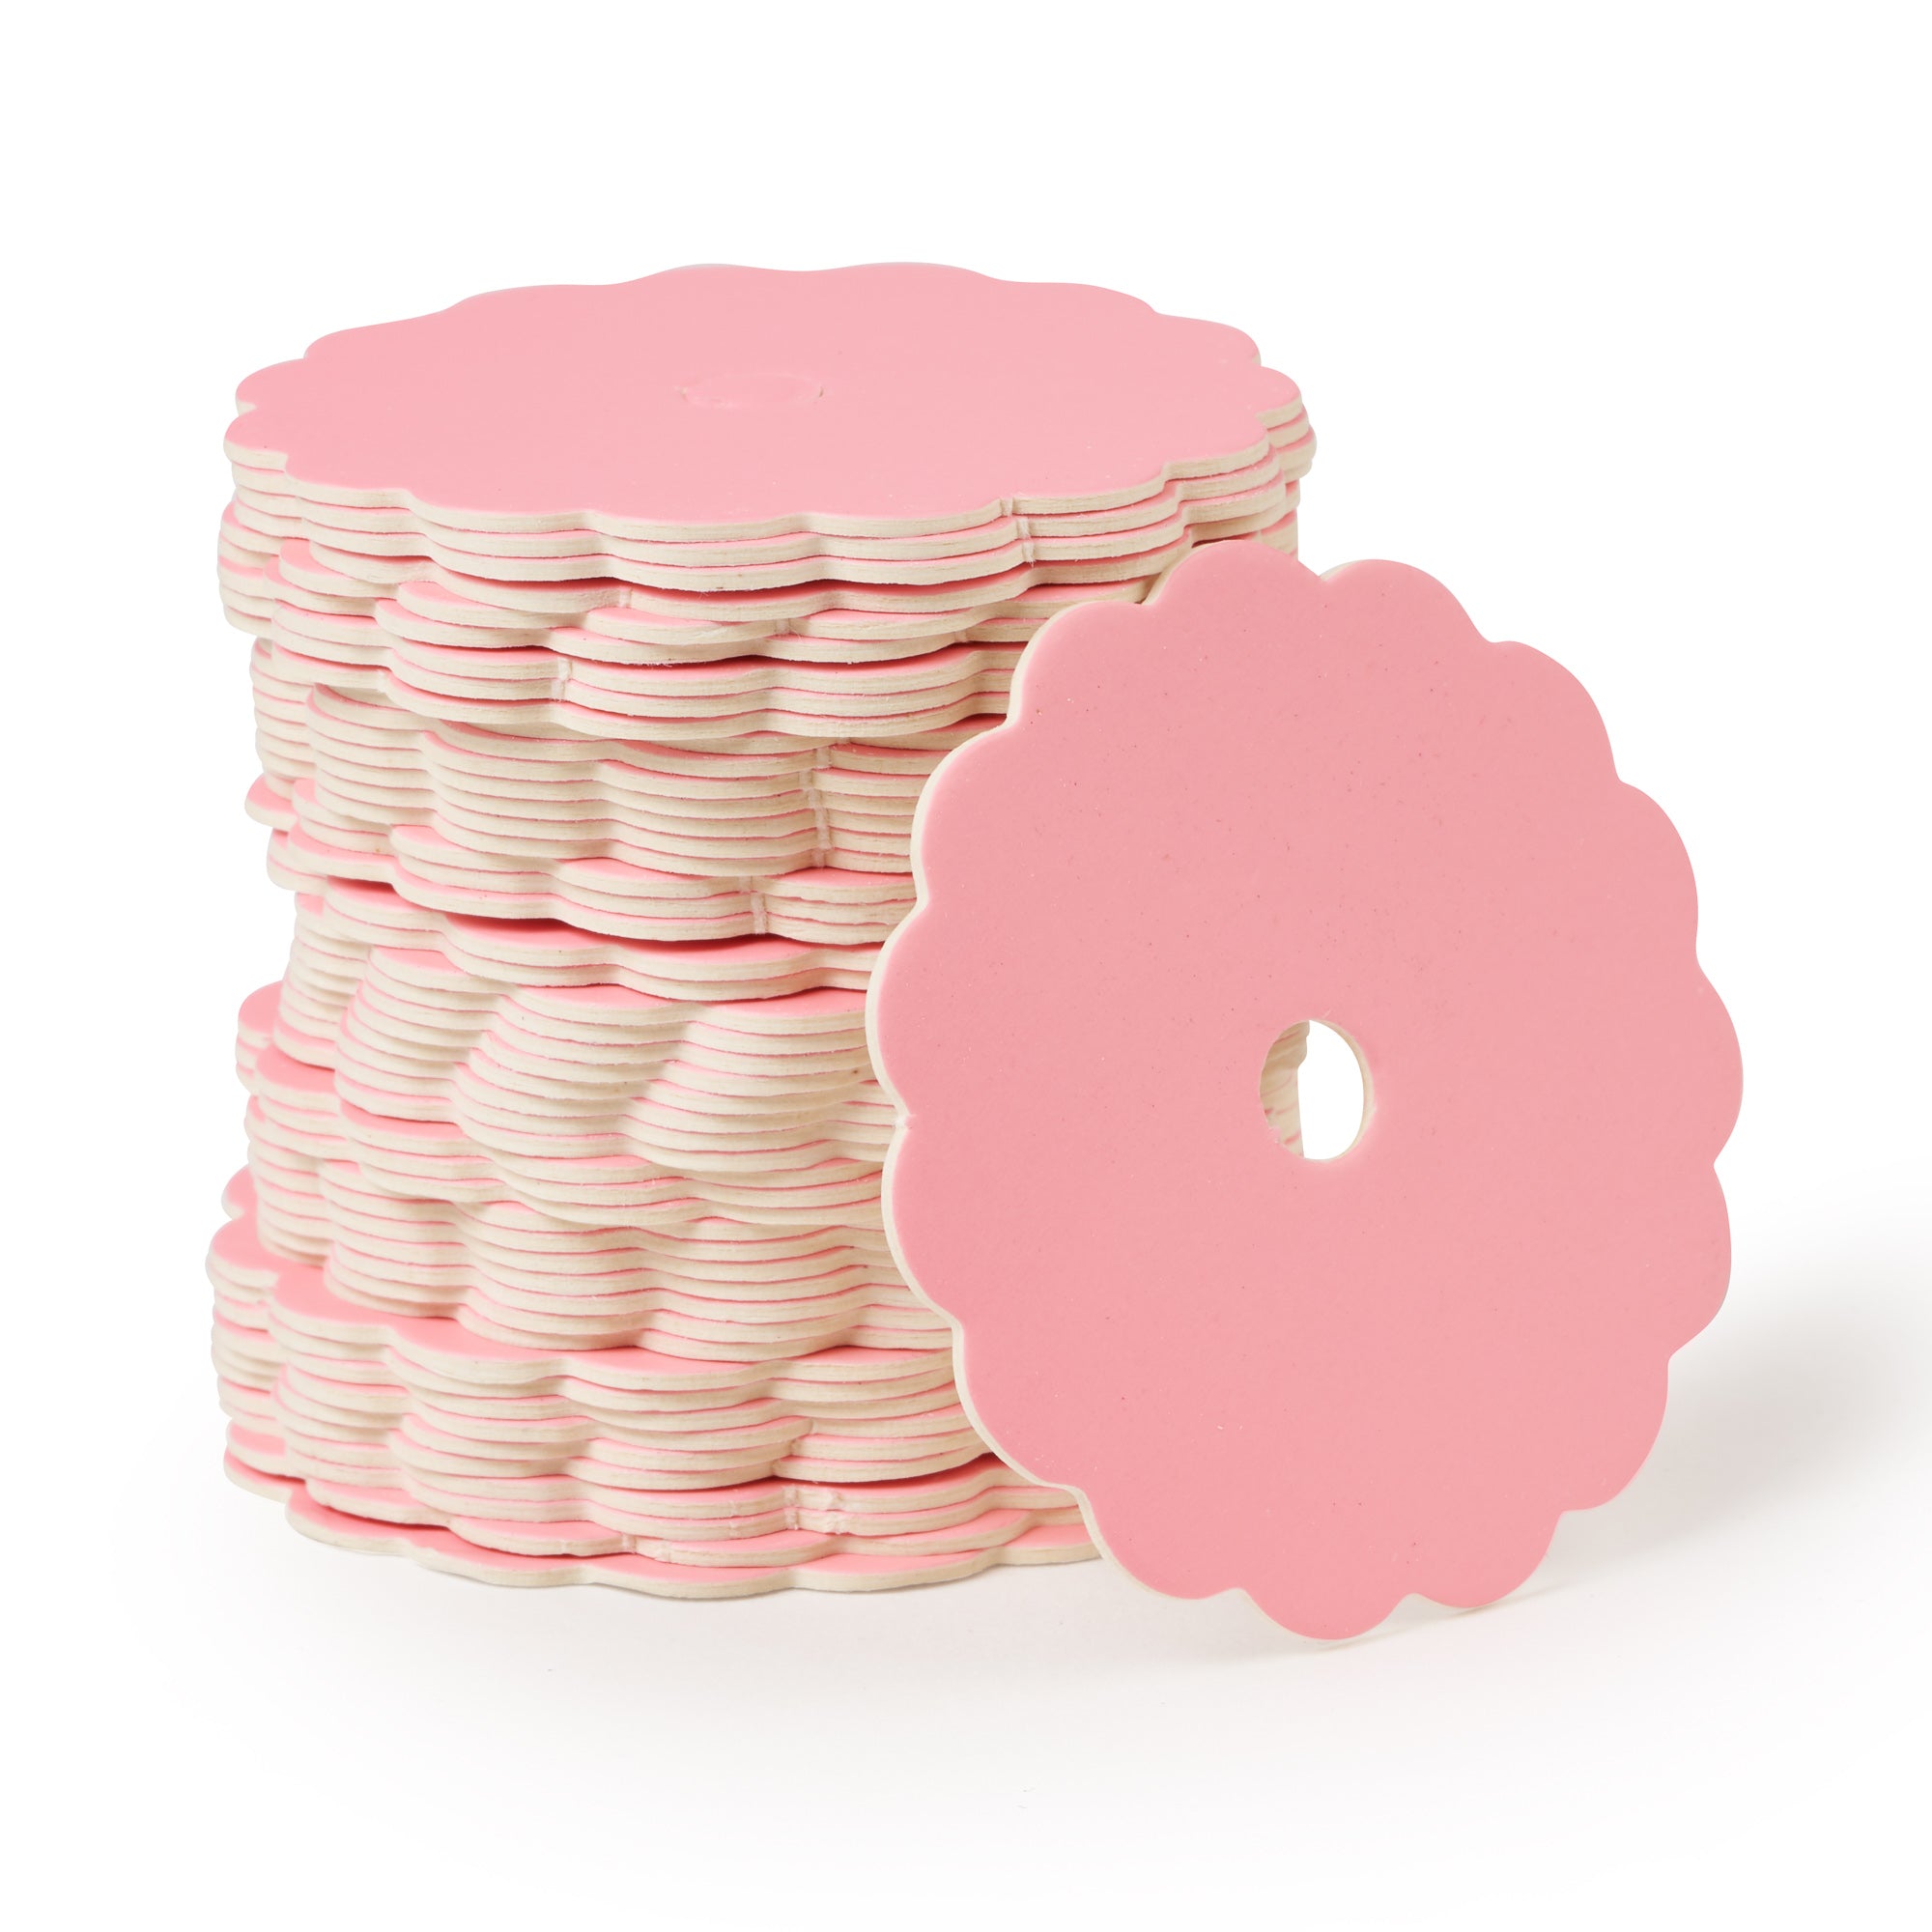 PINK SCALLOPED EDGE CAKEPOP BOARDS